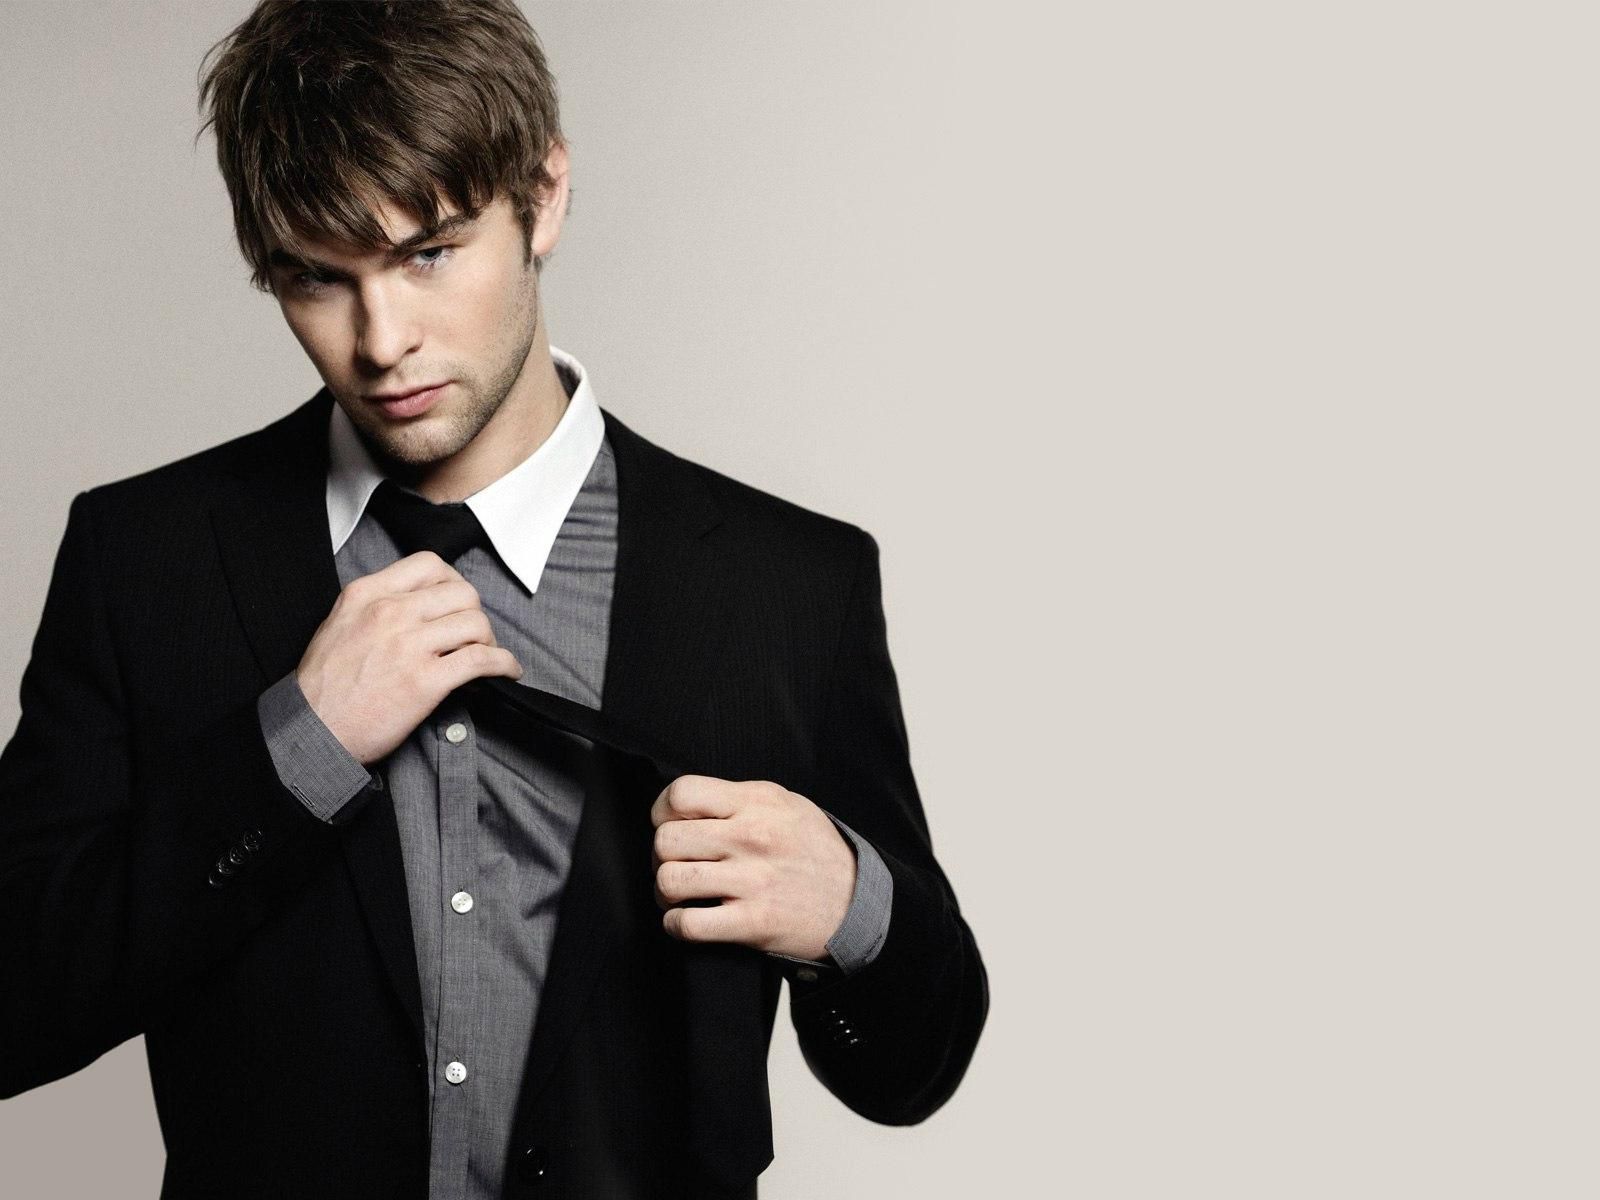 Chace Crawford HD Wallpaper for desktop download